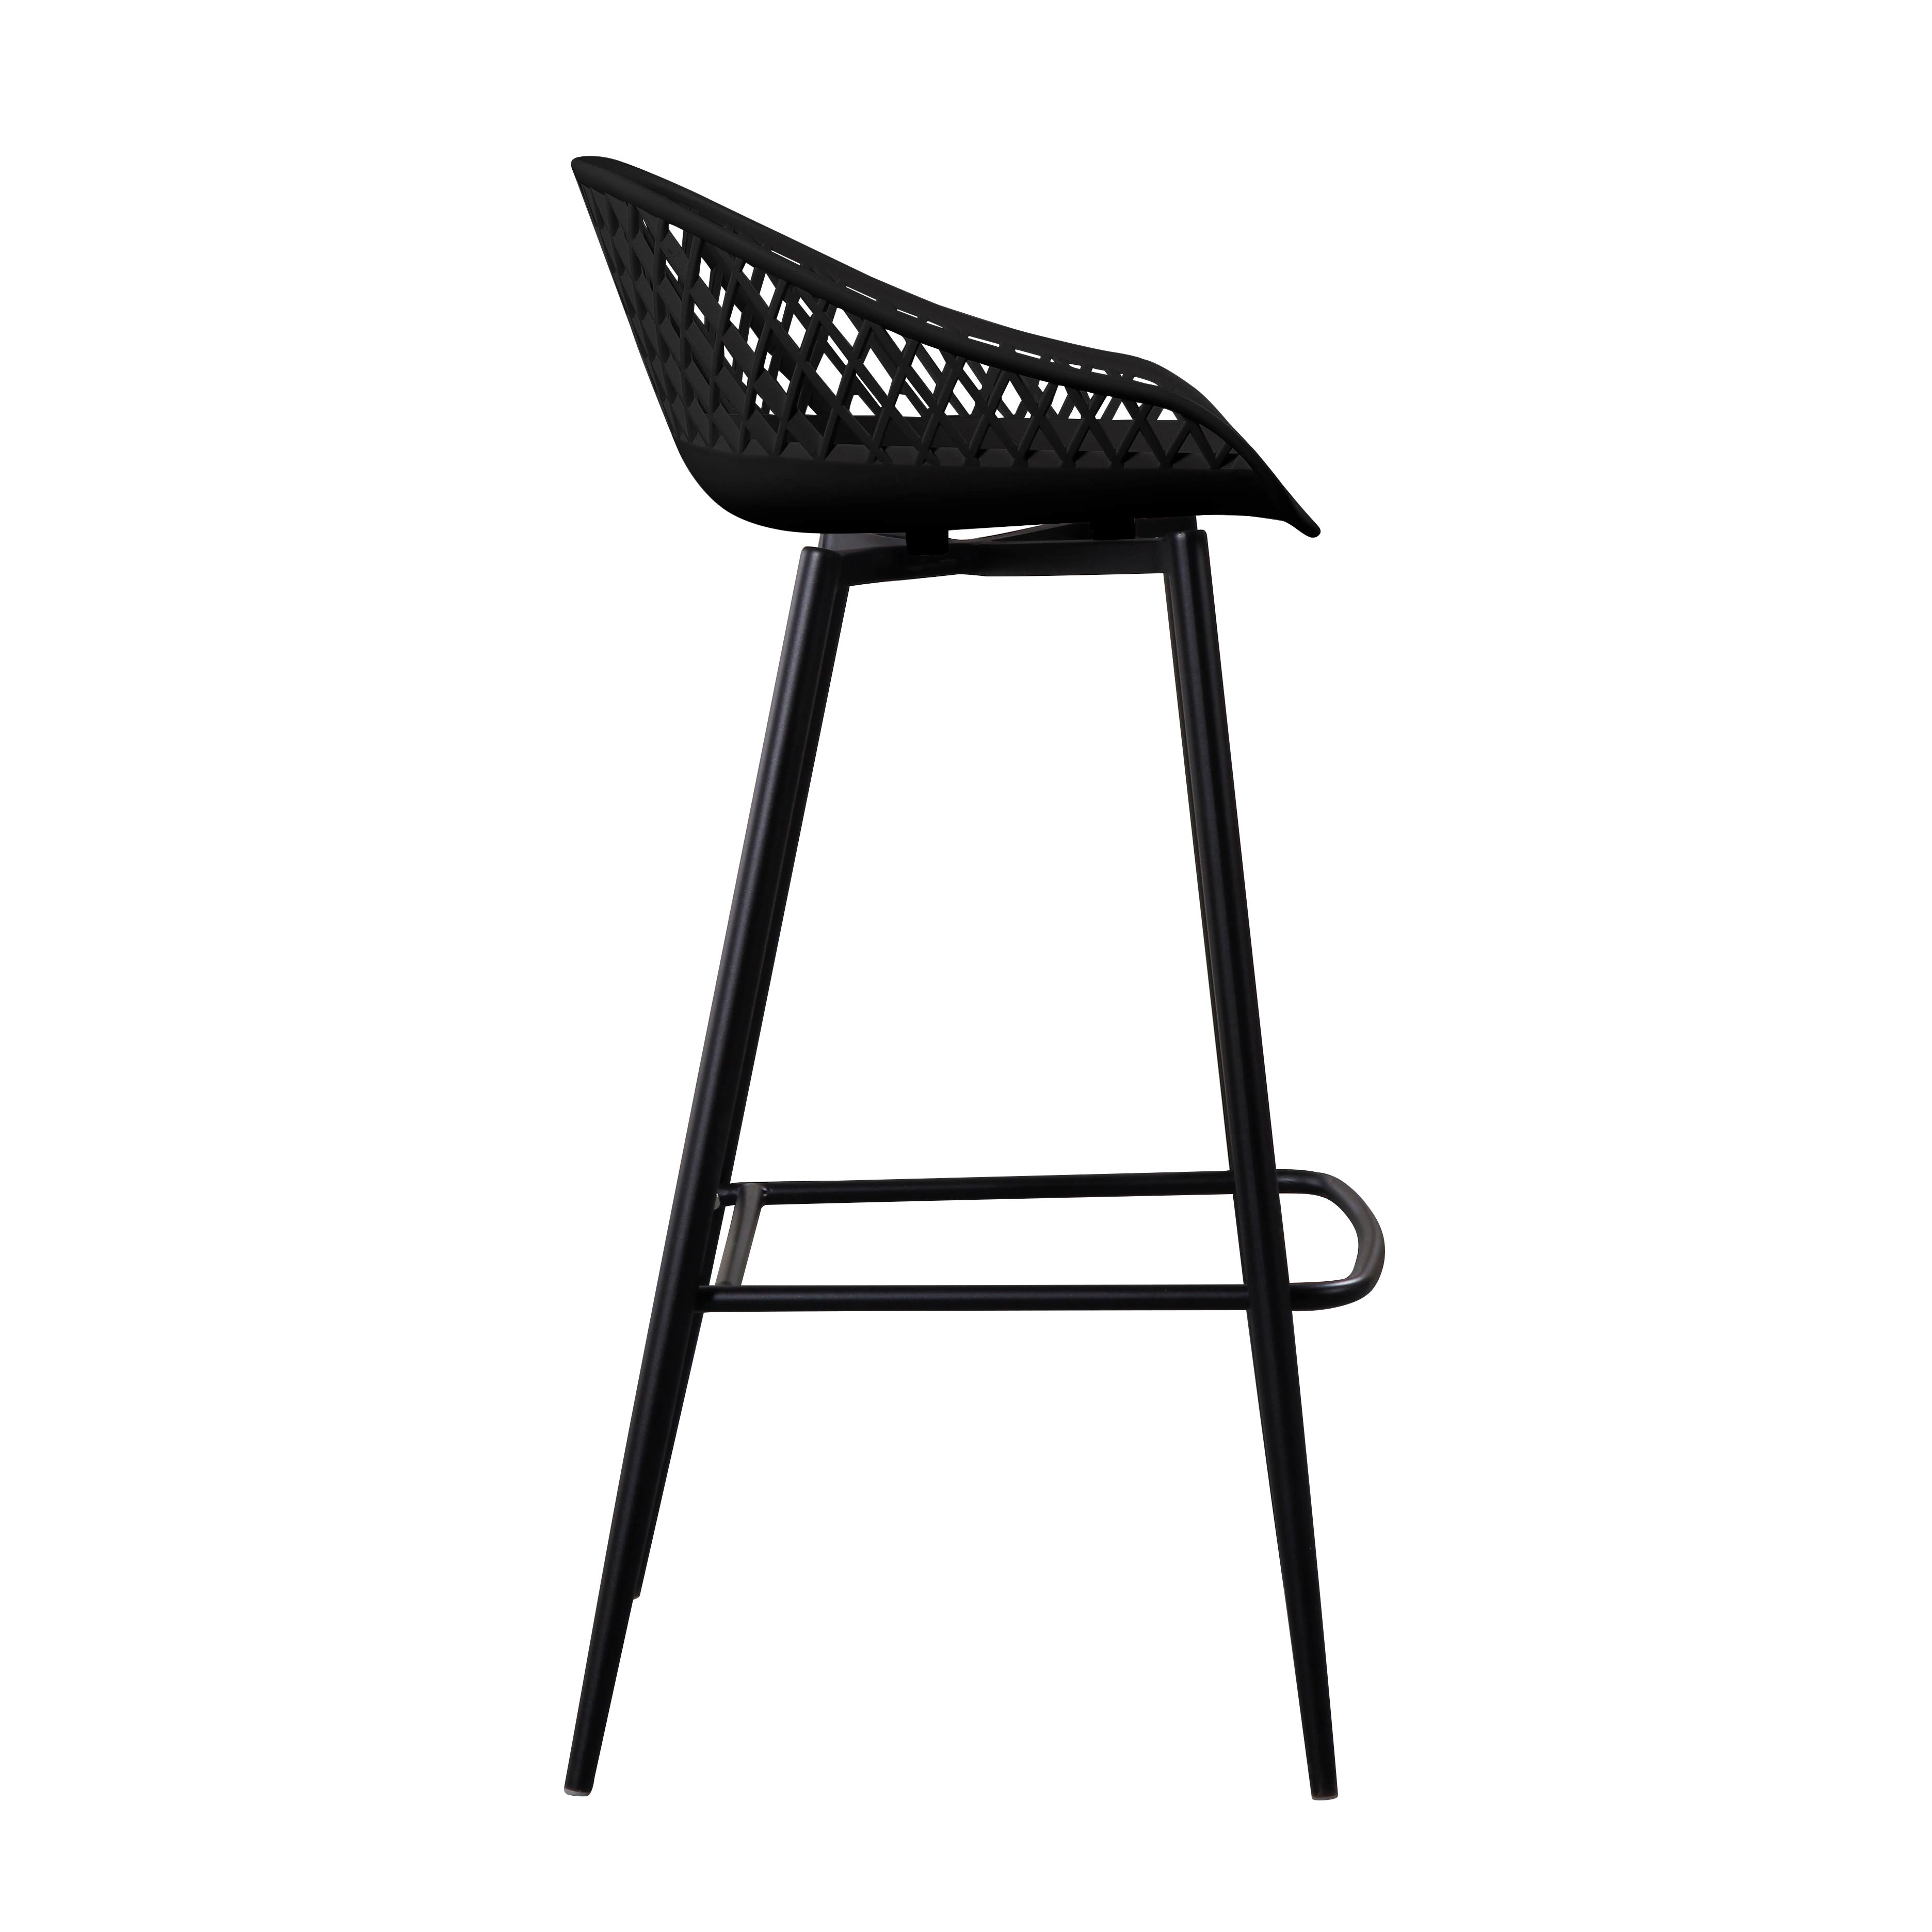 100% Original Plastic Dining Chairs For Sale -
 Bar Chair-1695 – Forman